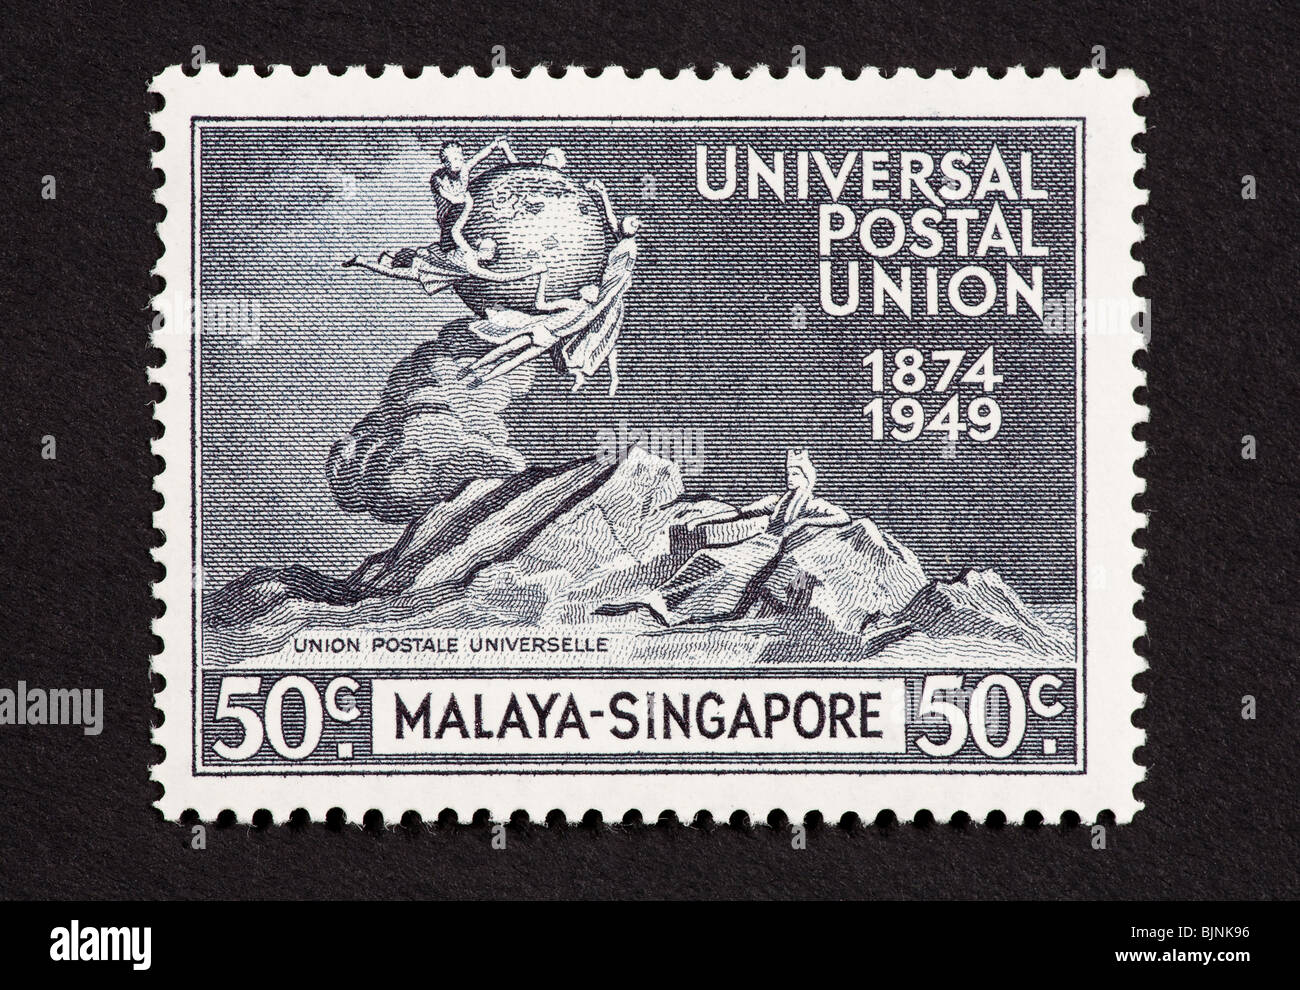 Postage stamp from Malaya (Singapore) honoring the 75'th anniversary of the International Postal Union. Stock Photo